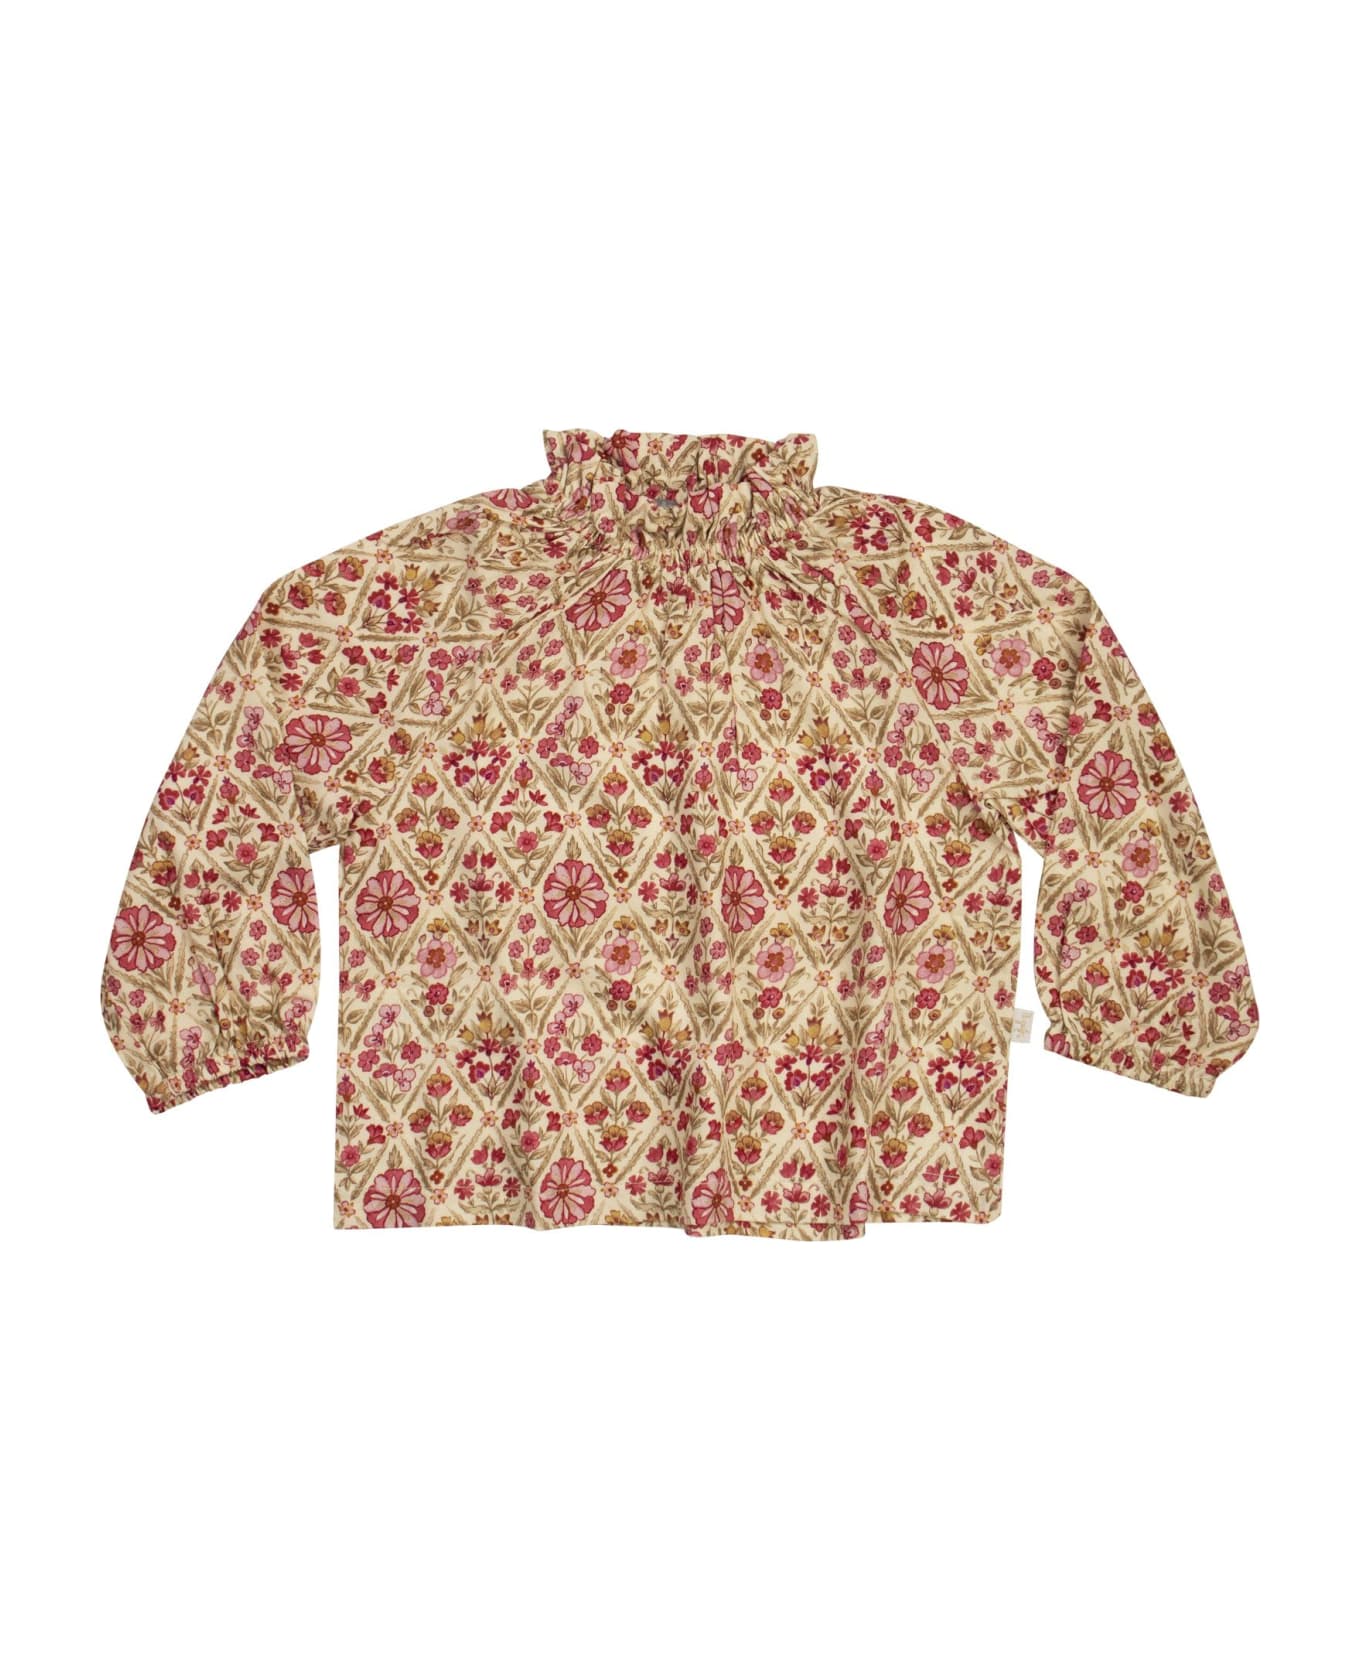 Il Gufo Long-sleeved, Patterned Shirt - Yellow シャツ